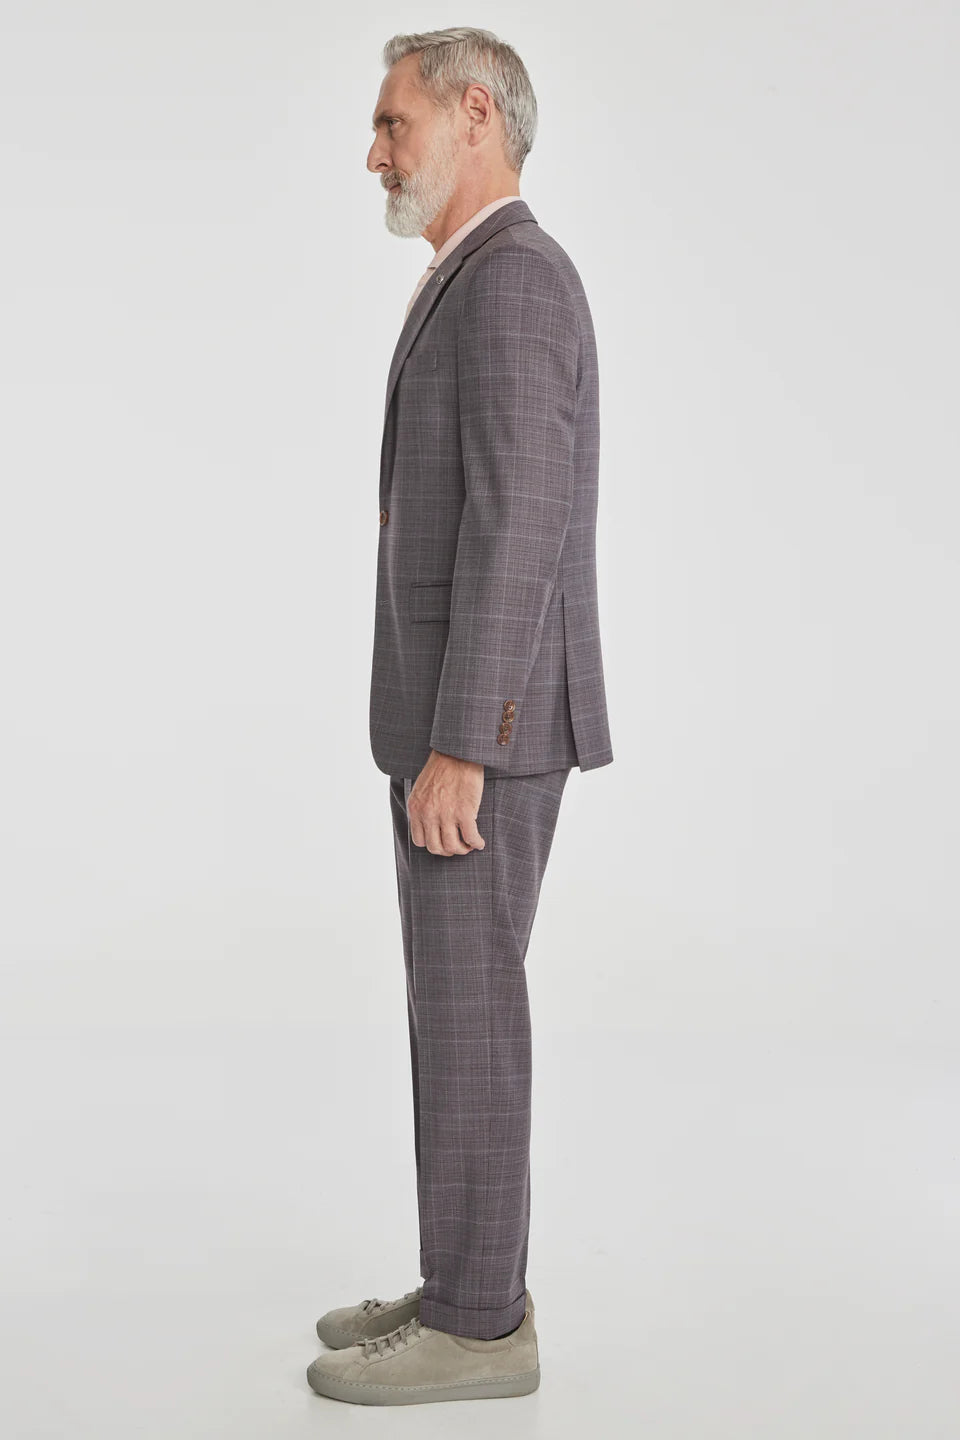 This Esprit&nbsp;suit featuring a soft plum tonal windowpane crafted from super 120's wool woven in Italy. The perfect year round weight meets stretch comfort.